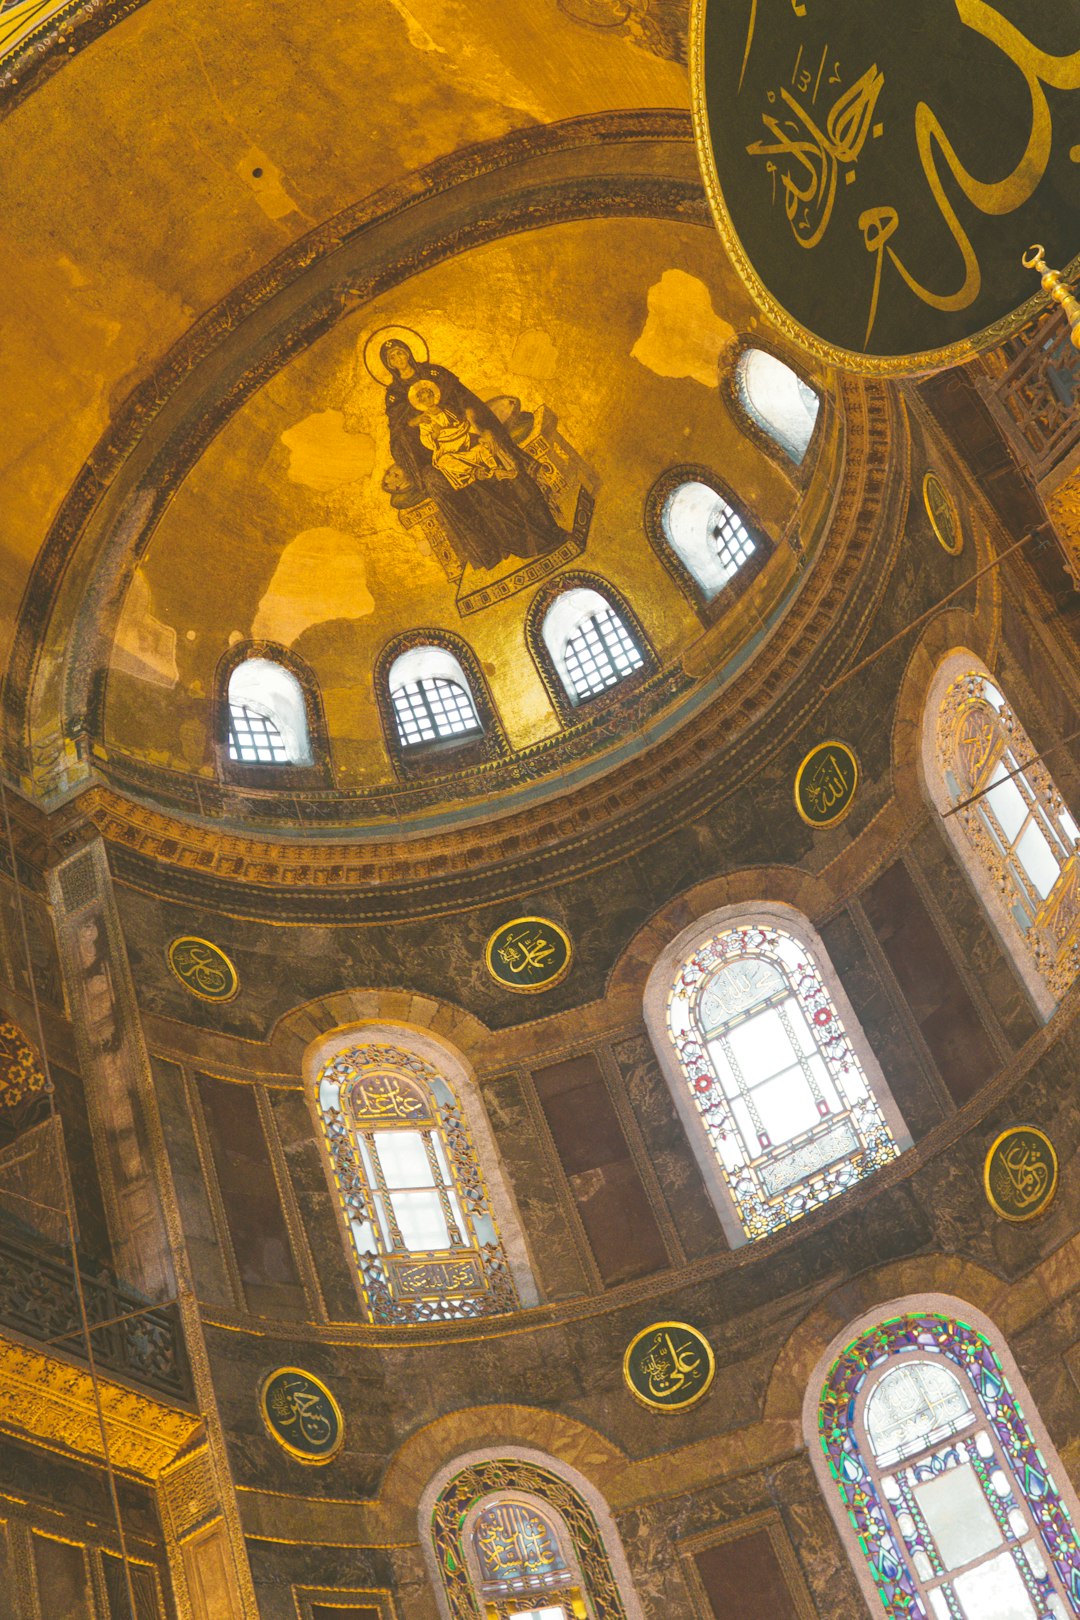 Travel Tips and Stories of Hagia Sophia Museum in Turkey